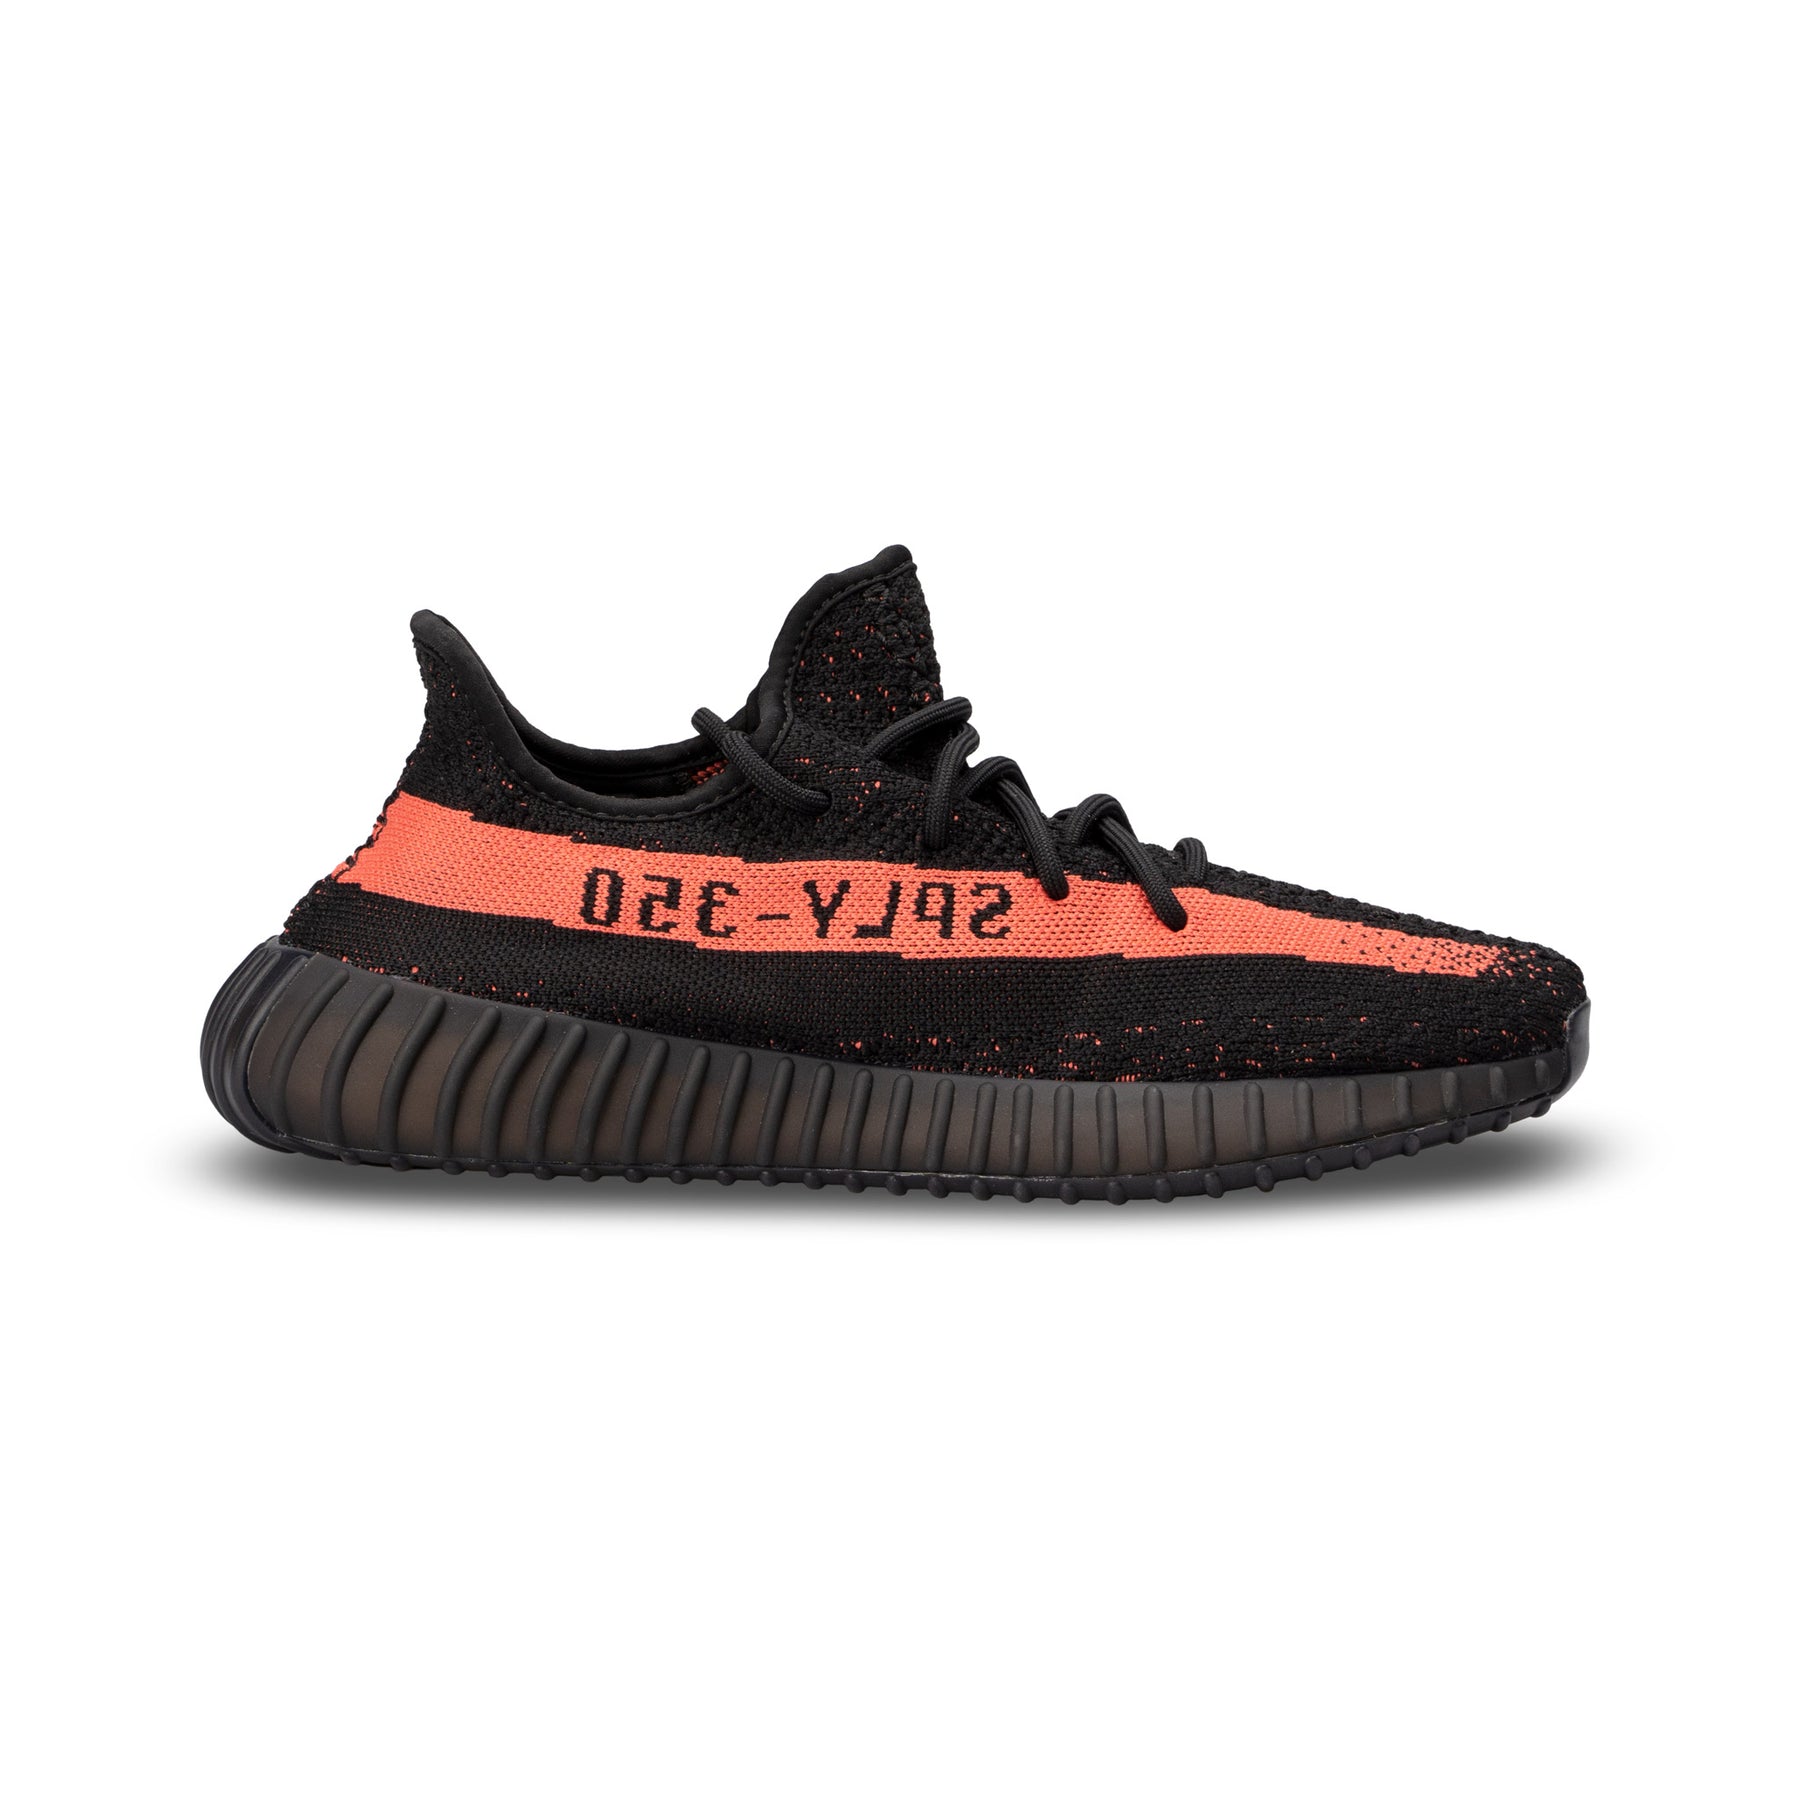 Yeezy Boost 350 V2 Core Black red